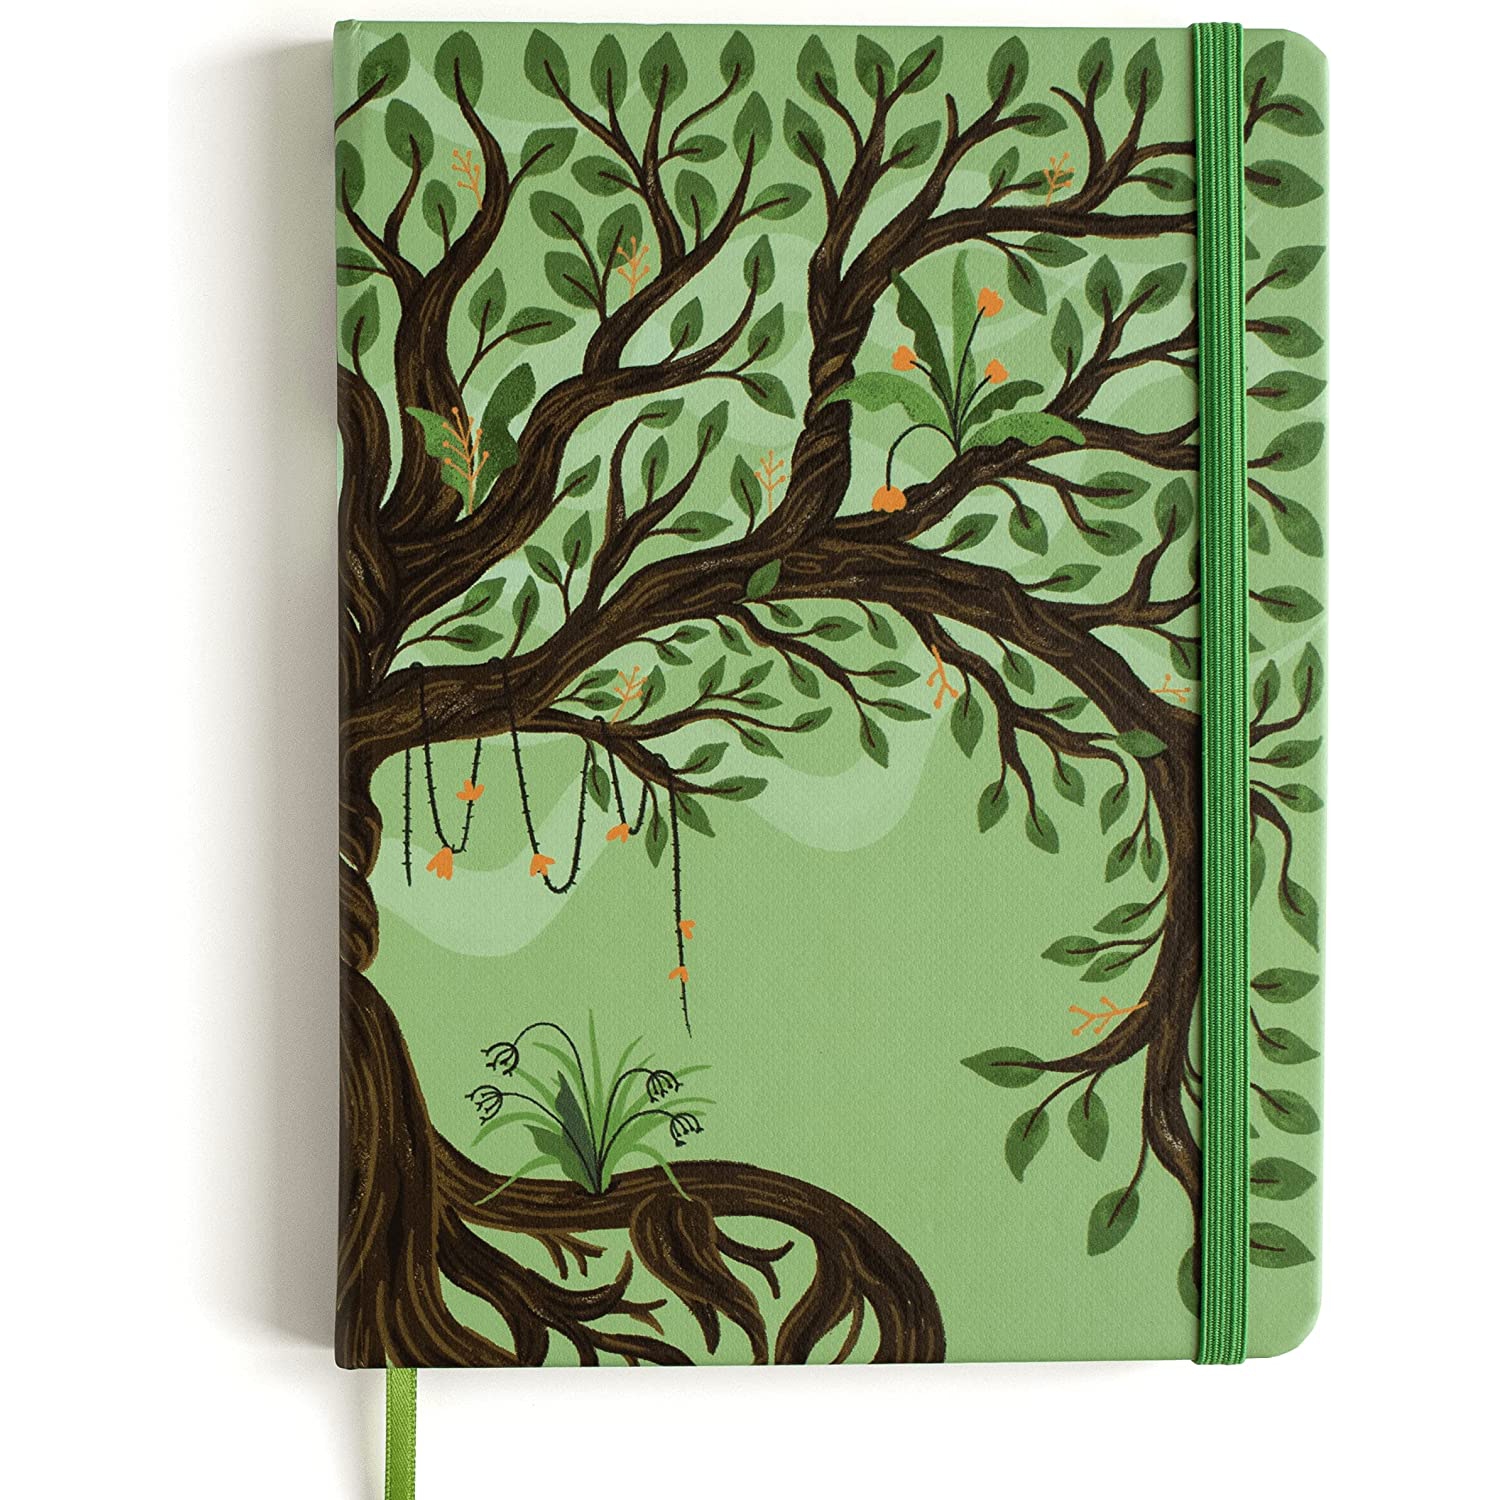 Rileys Tree of Life, 8" x 6", Blank Journal 240 Pages, Ivory Paper, Blank Notebook for Men and Women, Great Gift for Creatives (Drawing Book)